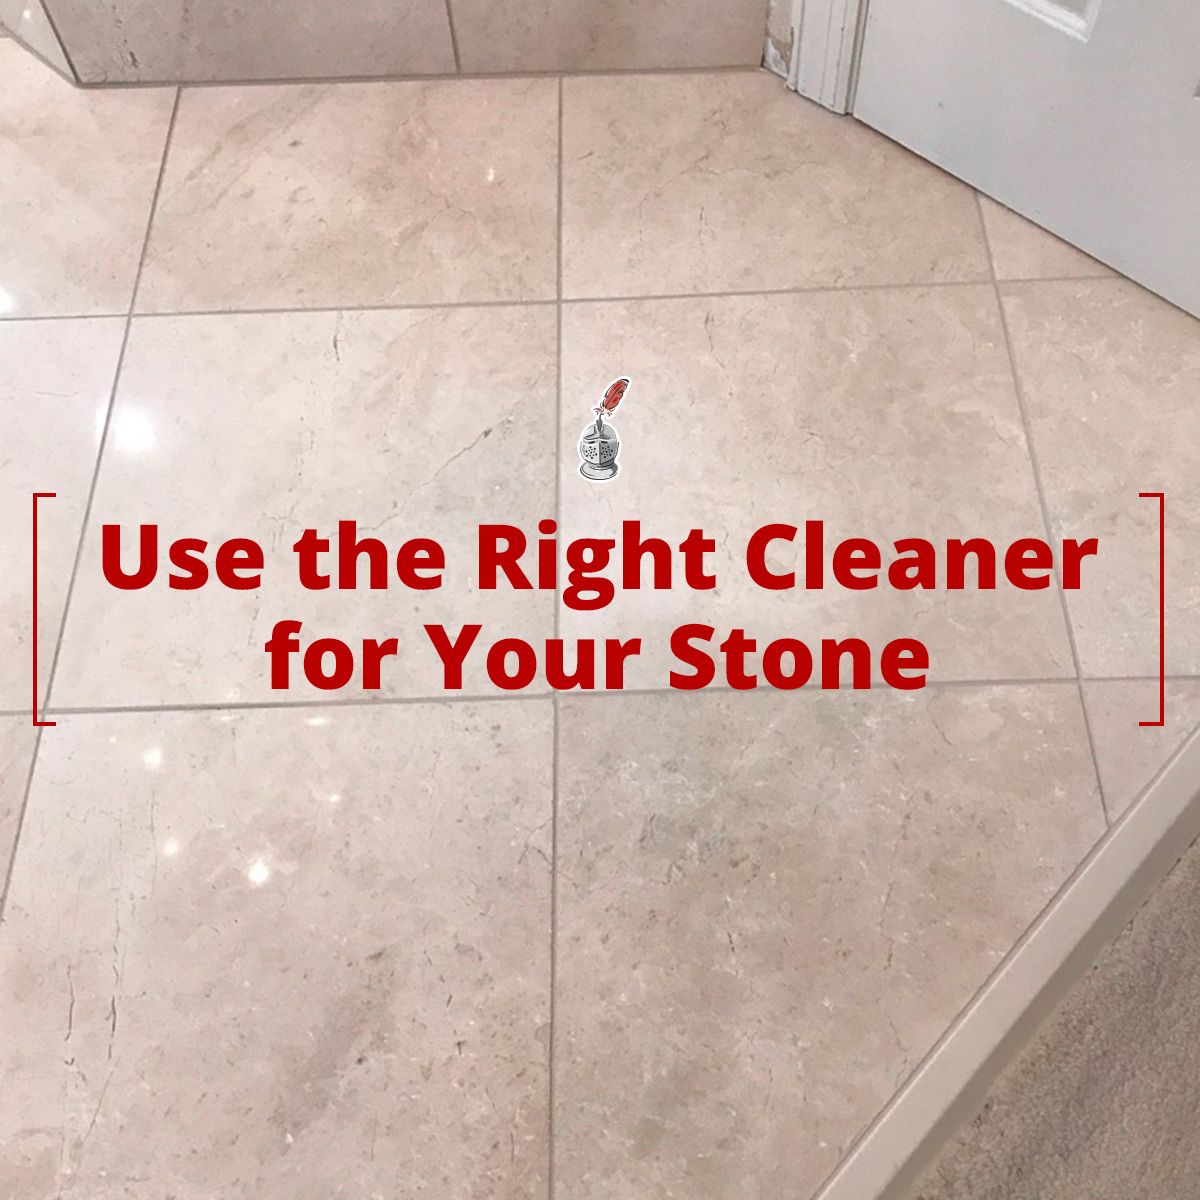 Use the Right Cleaner for Your Stone